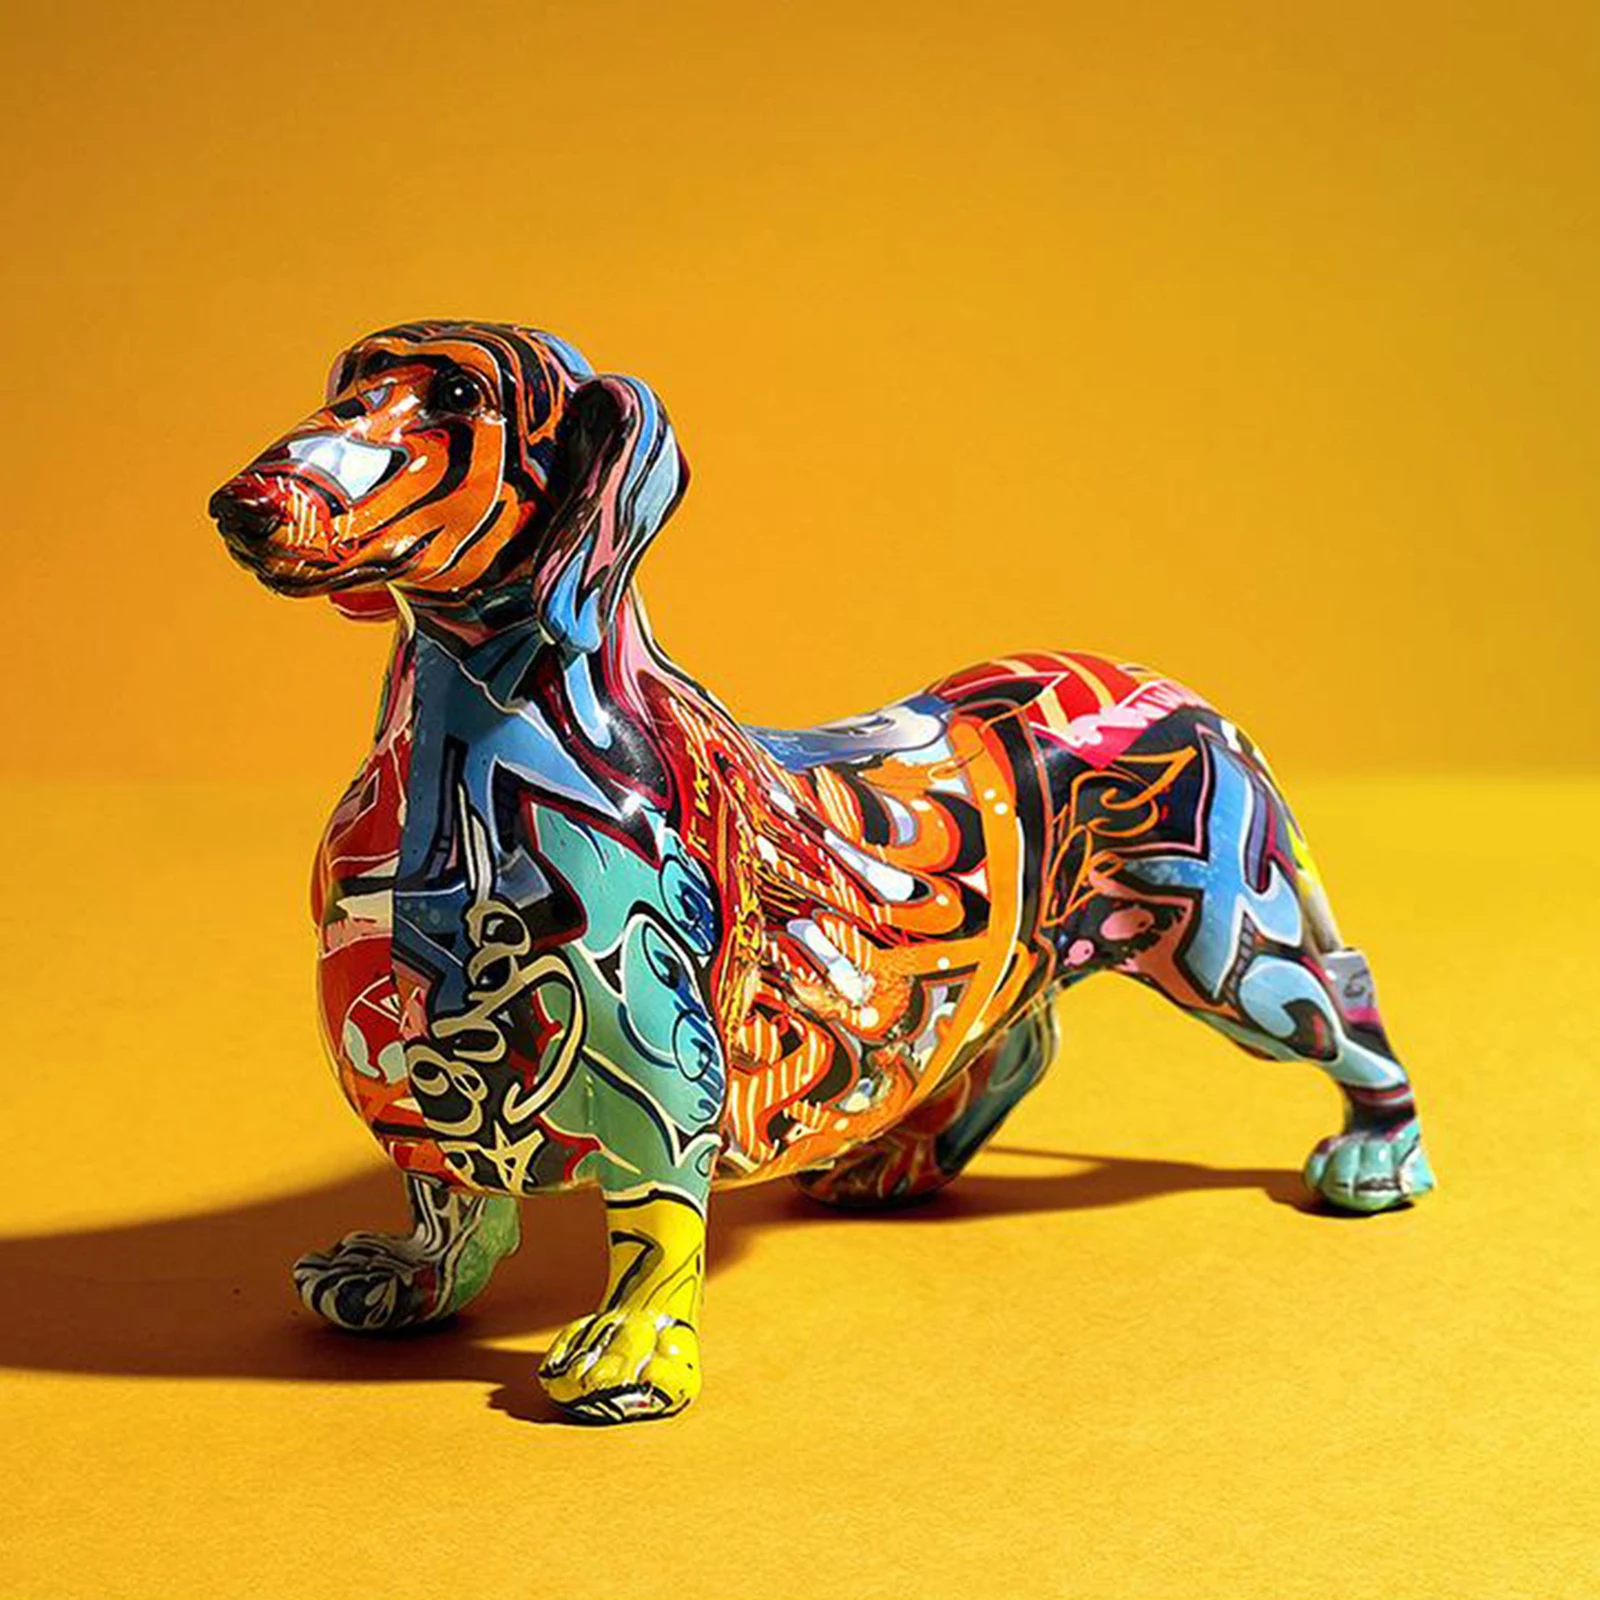 Nordic Painted Colorful Dachshund Dog Figurine Sculpture Statue Ornament